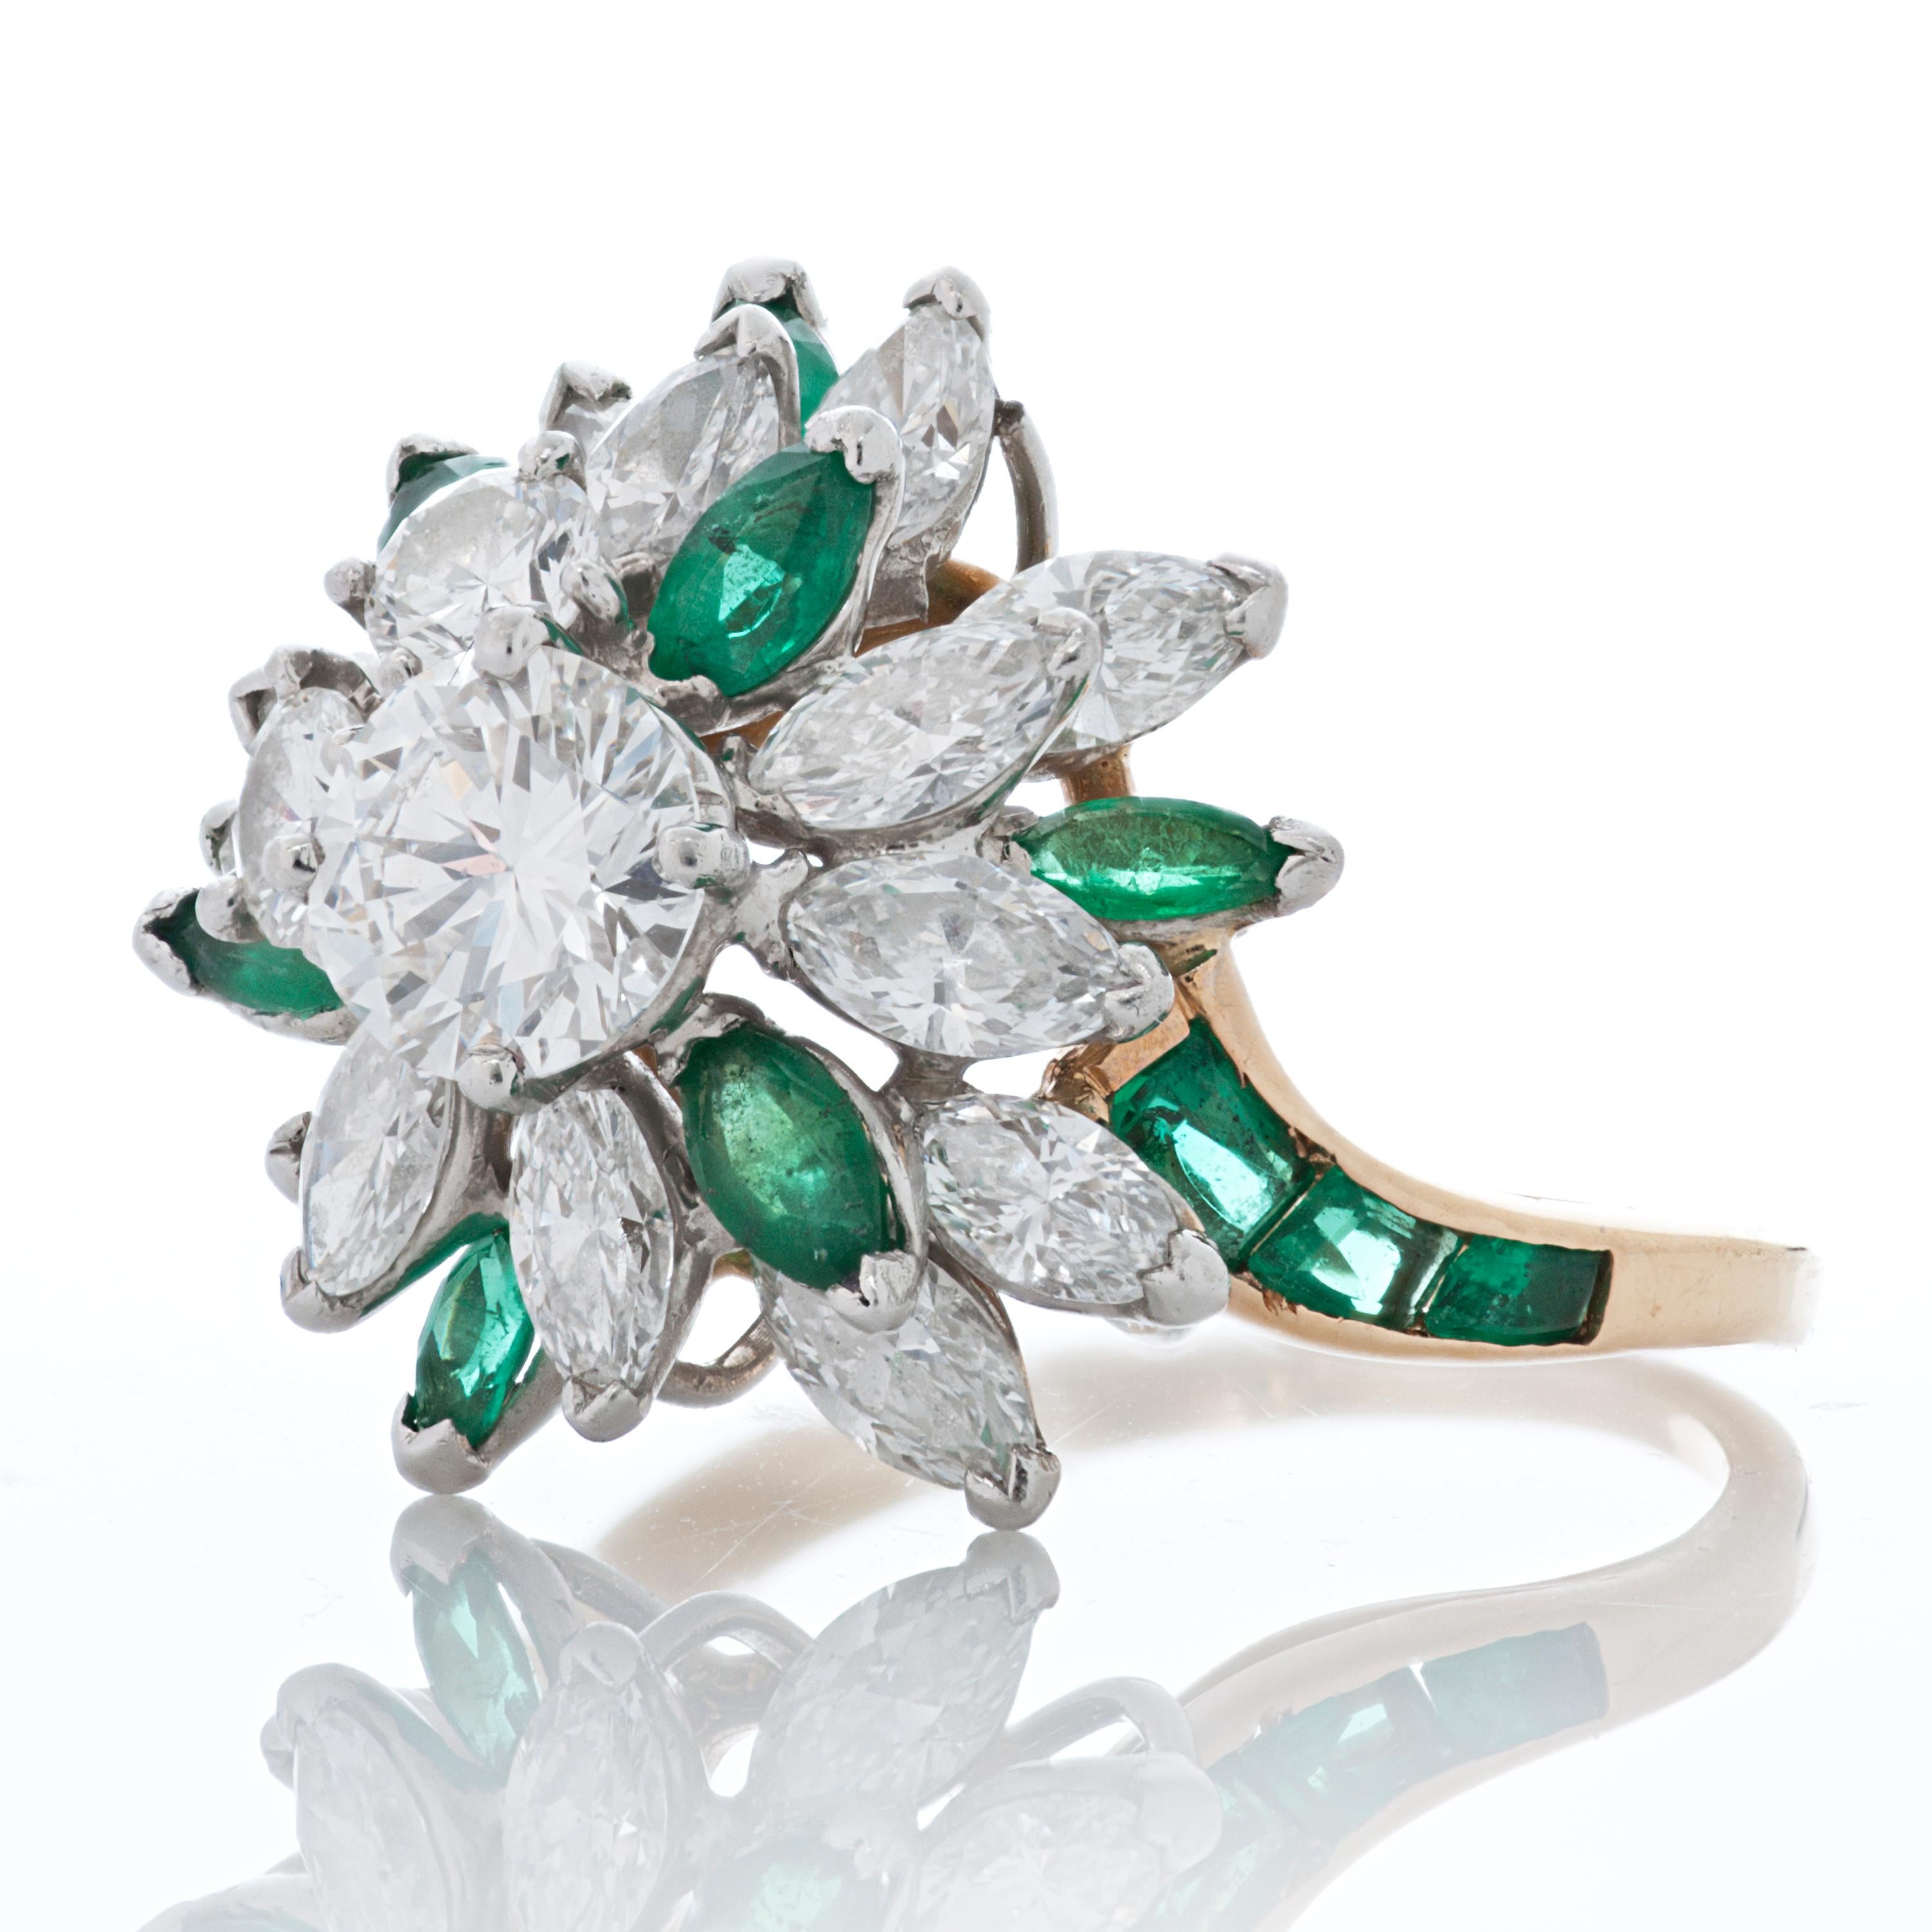 Oscar Heyman diamond and emerald 18k yellow gold cocktail cluster style ring.  

The centerpiece of this ring is a 0.70 carat round diamond surrounded by 2 round diamonds totaling 0.30 carat and 13 marquise cut diamonds totaling 1.50ct.  The